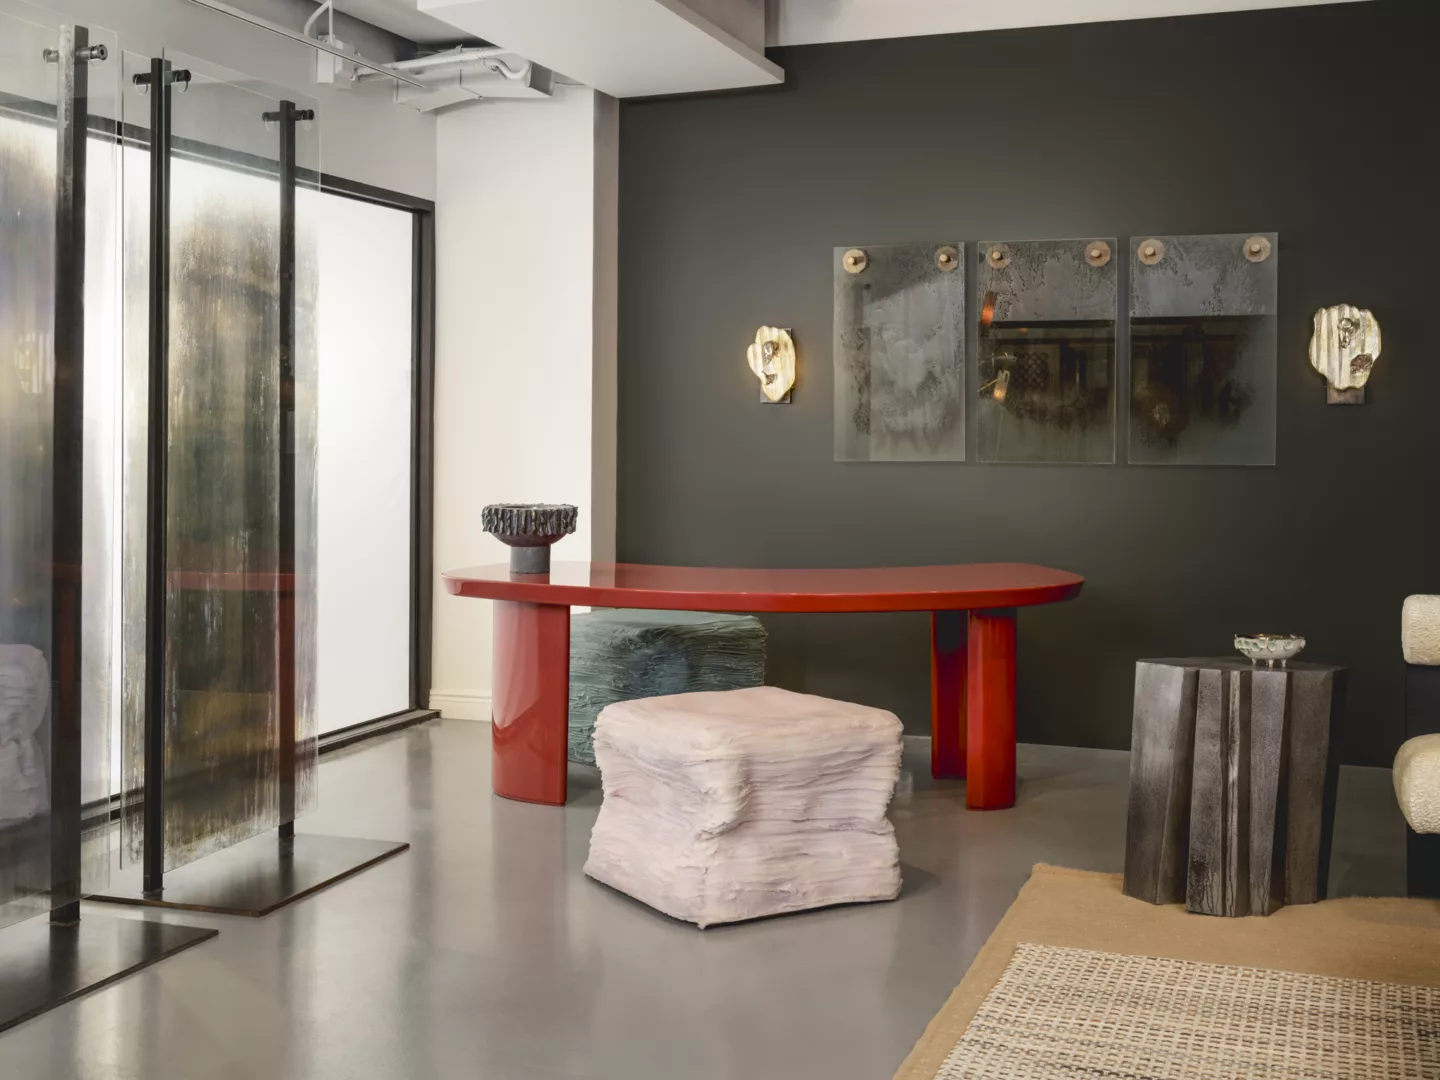 Fourth House installation view of Gregory Nangle design and artworks with lacquer Arc desk